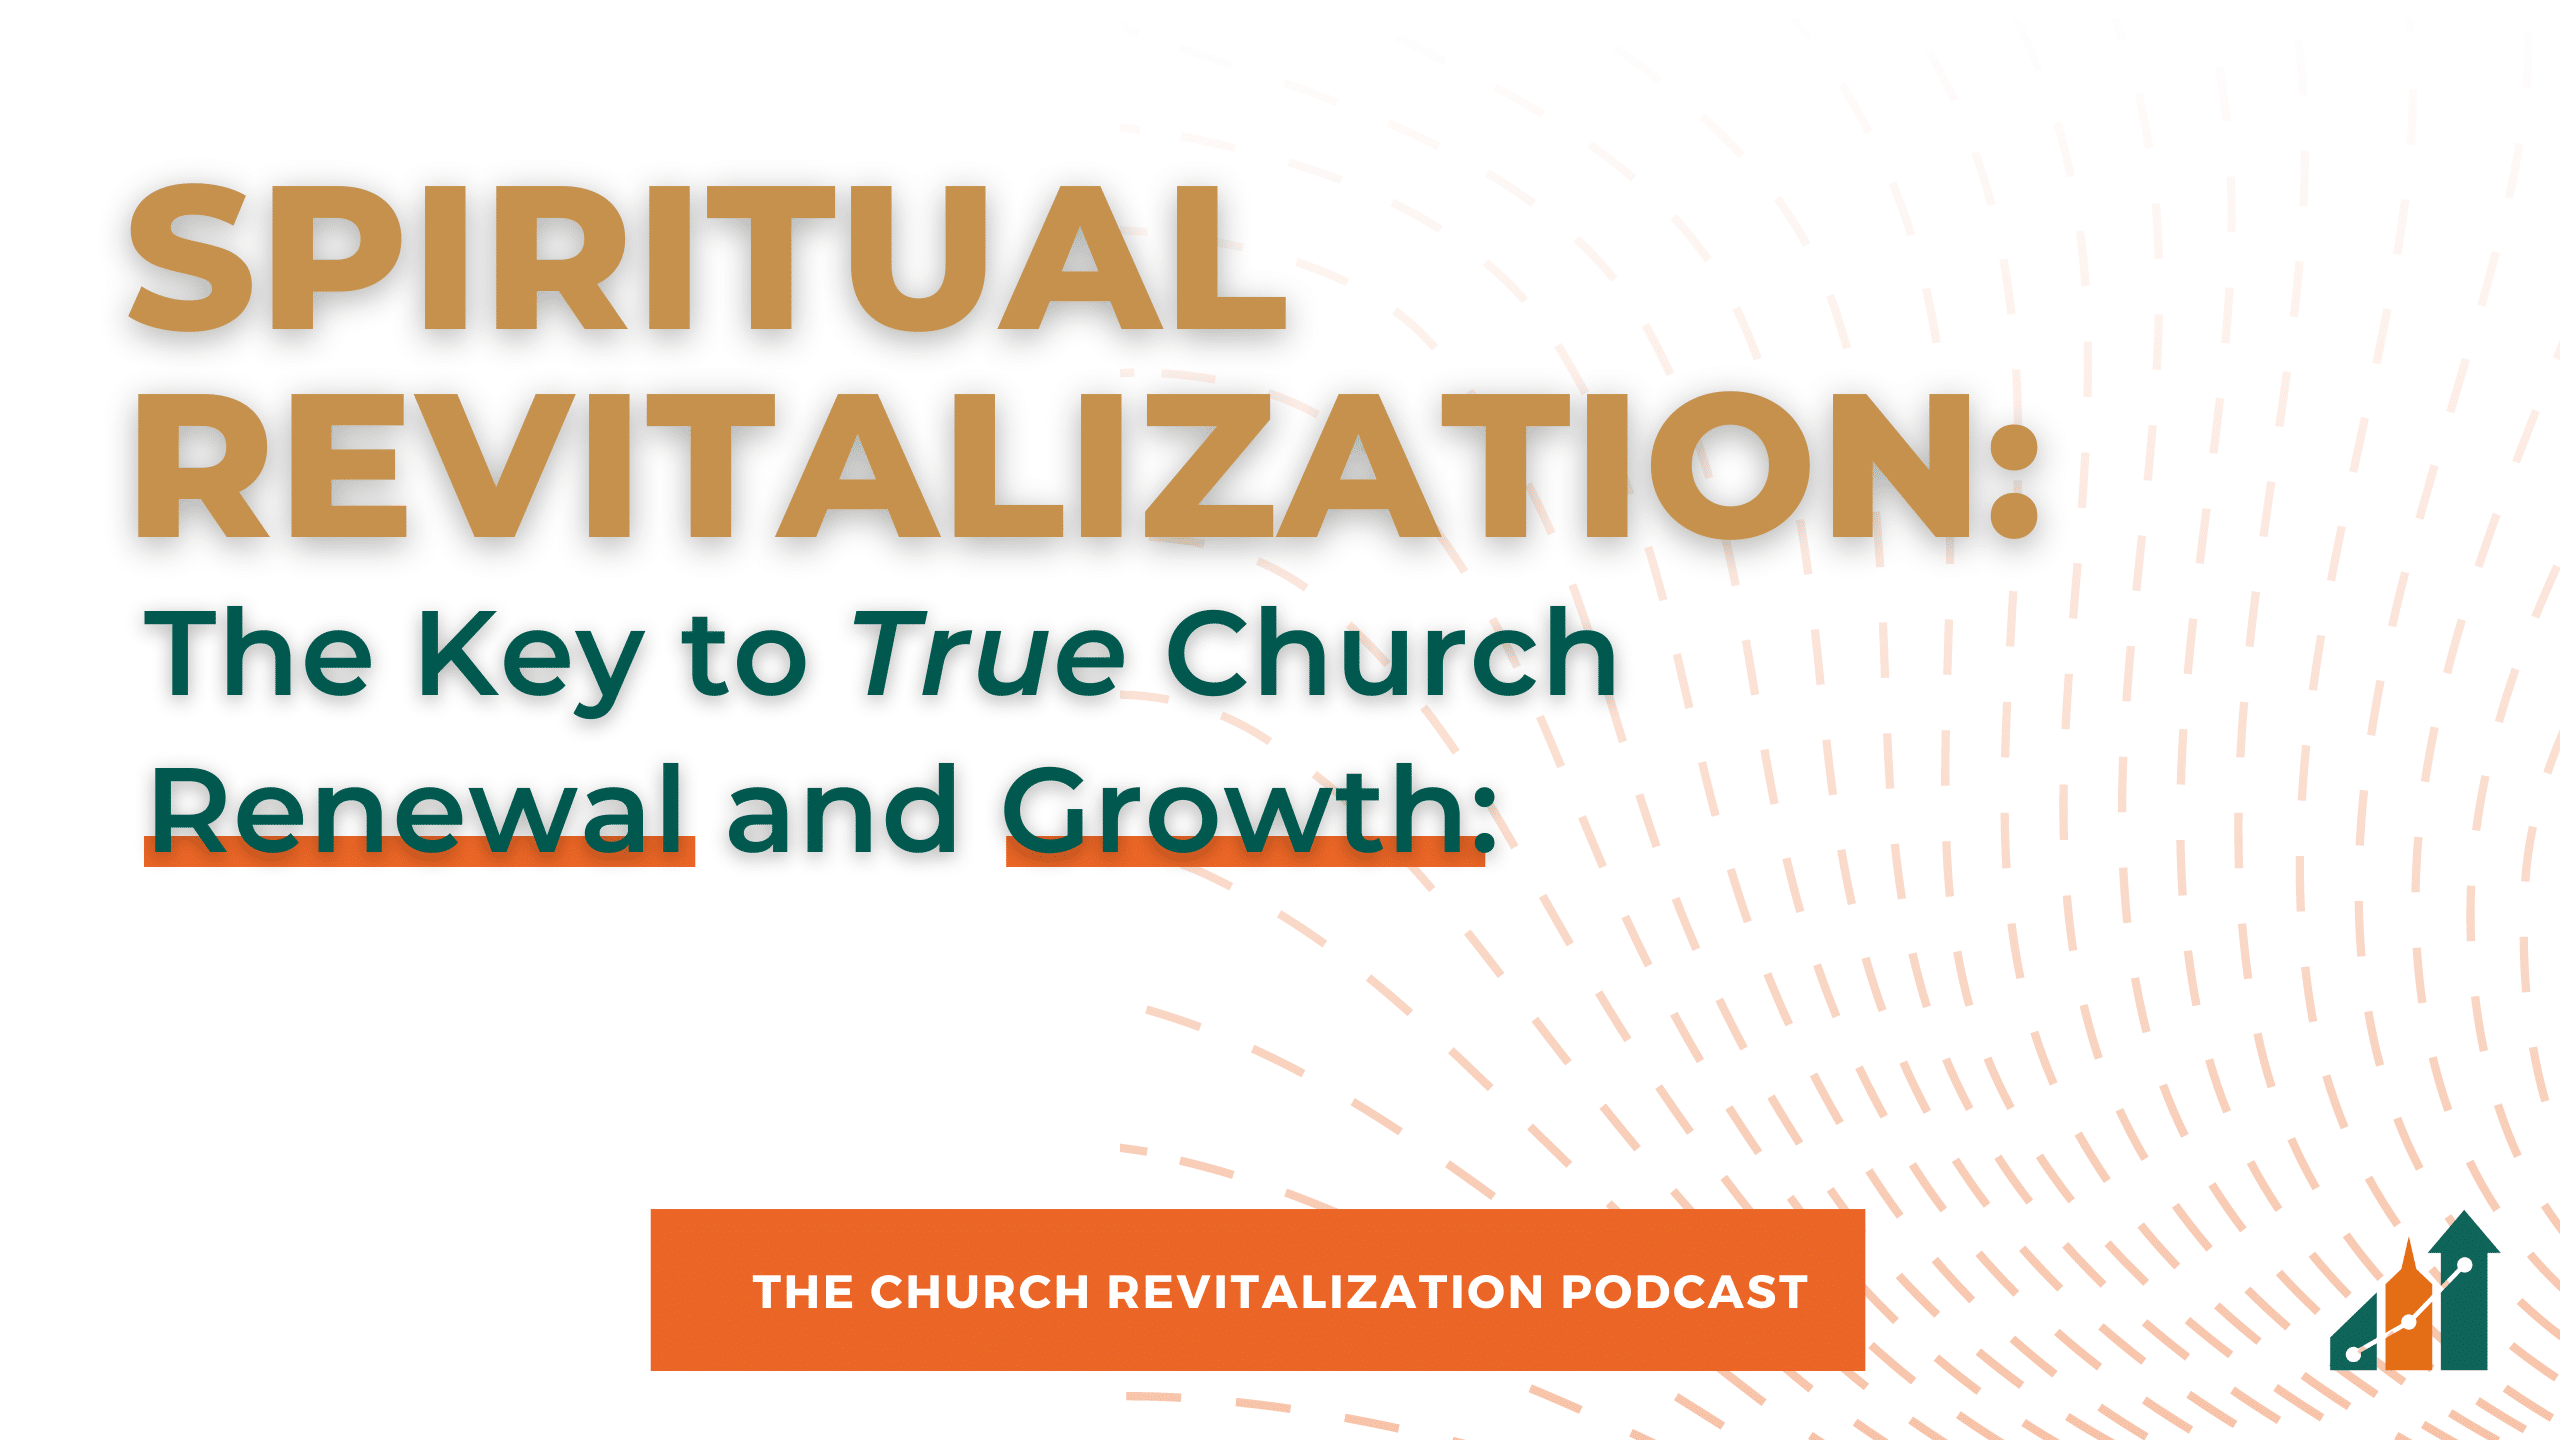 Spiritual Revitalization: The Key to True Church Renewal and Growth